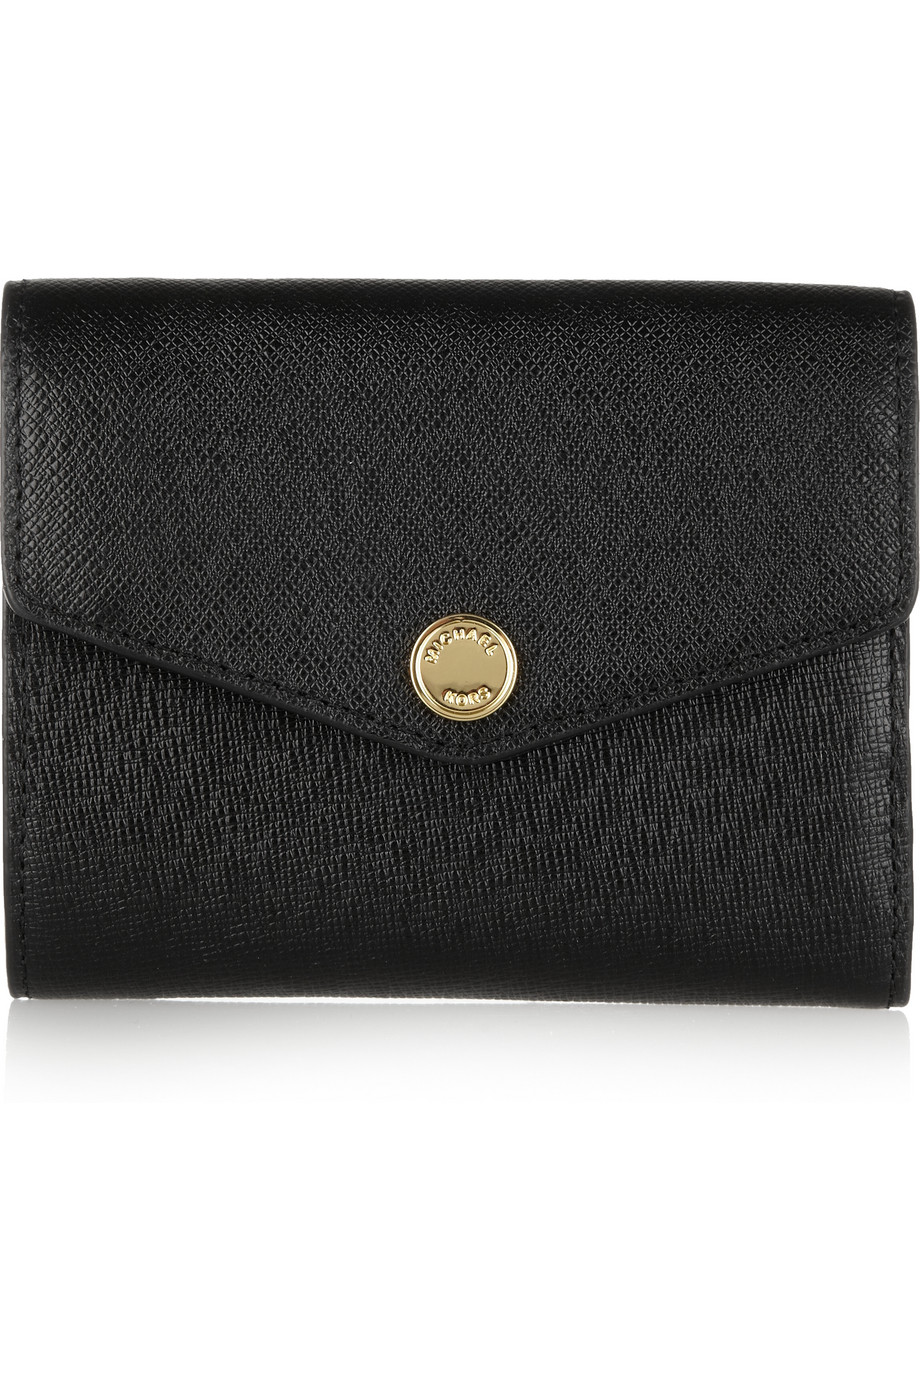 Michael By Michael Kors Small Colorblock Texturedleather Wallet in ...